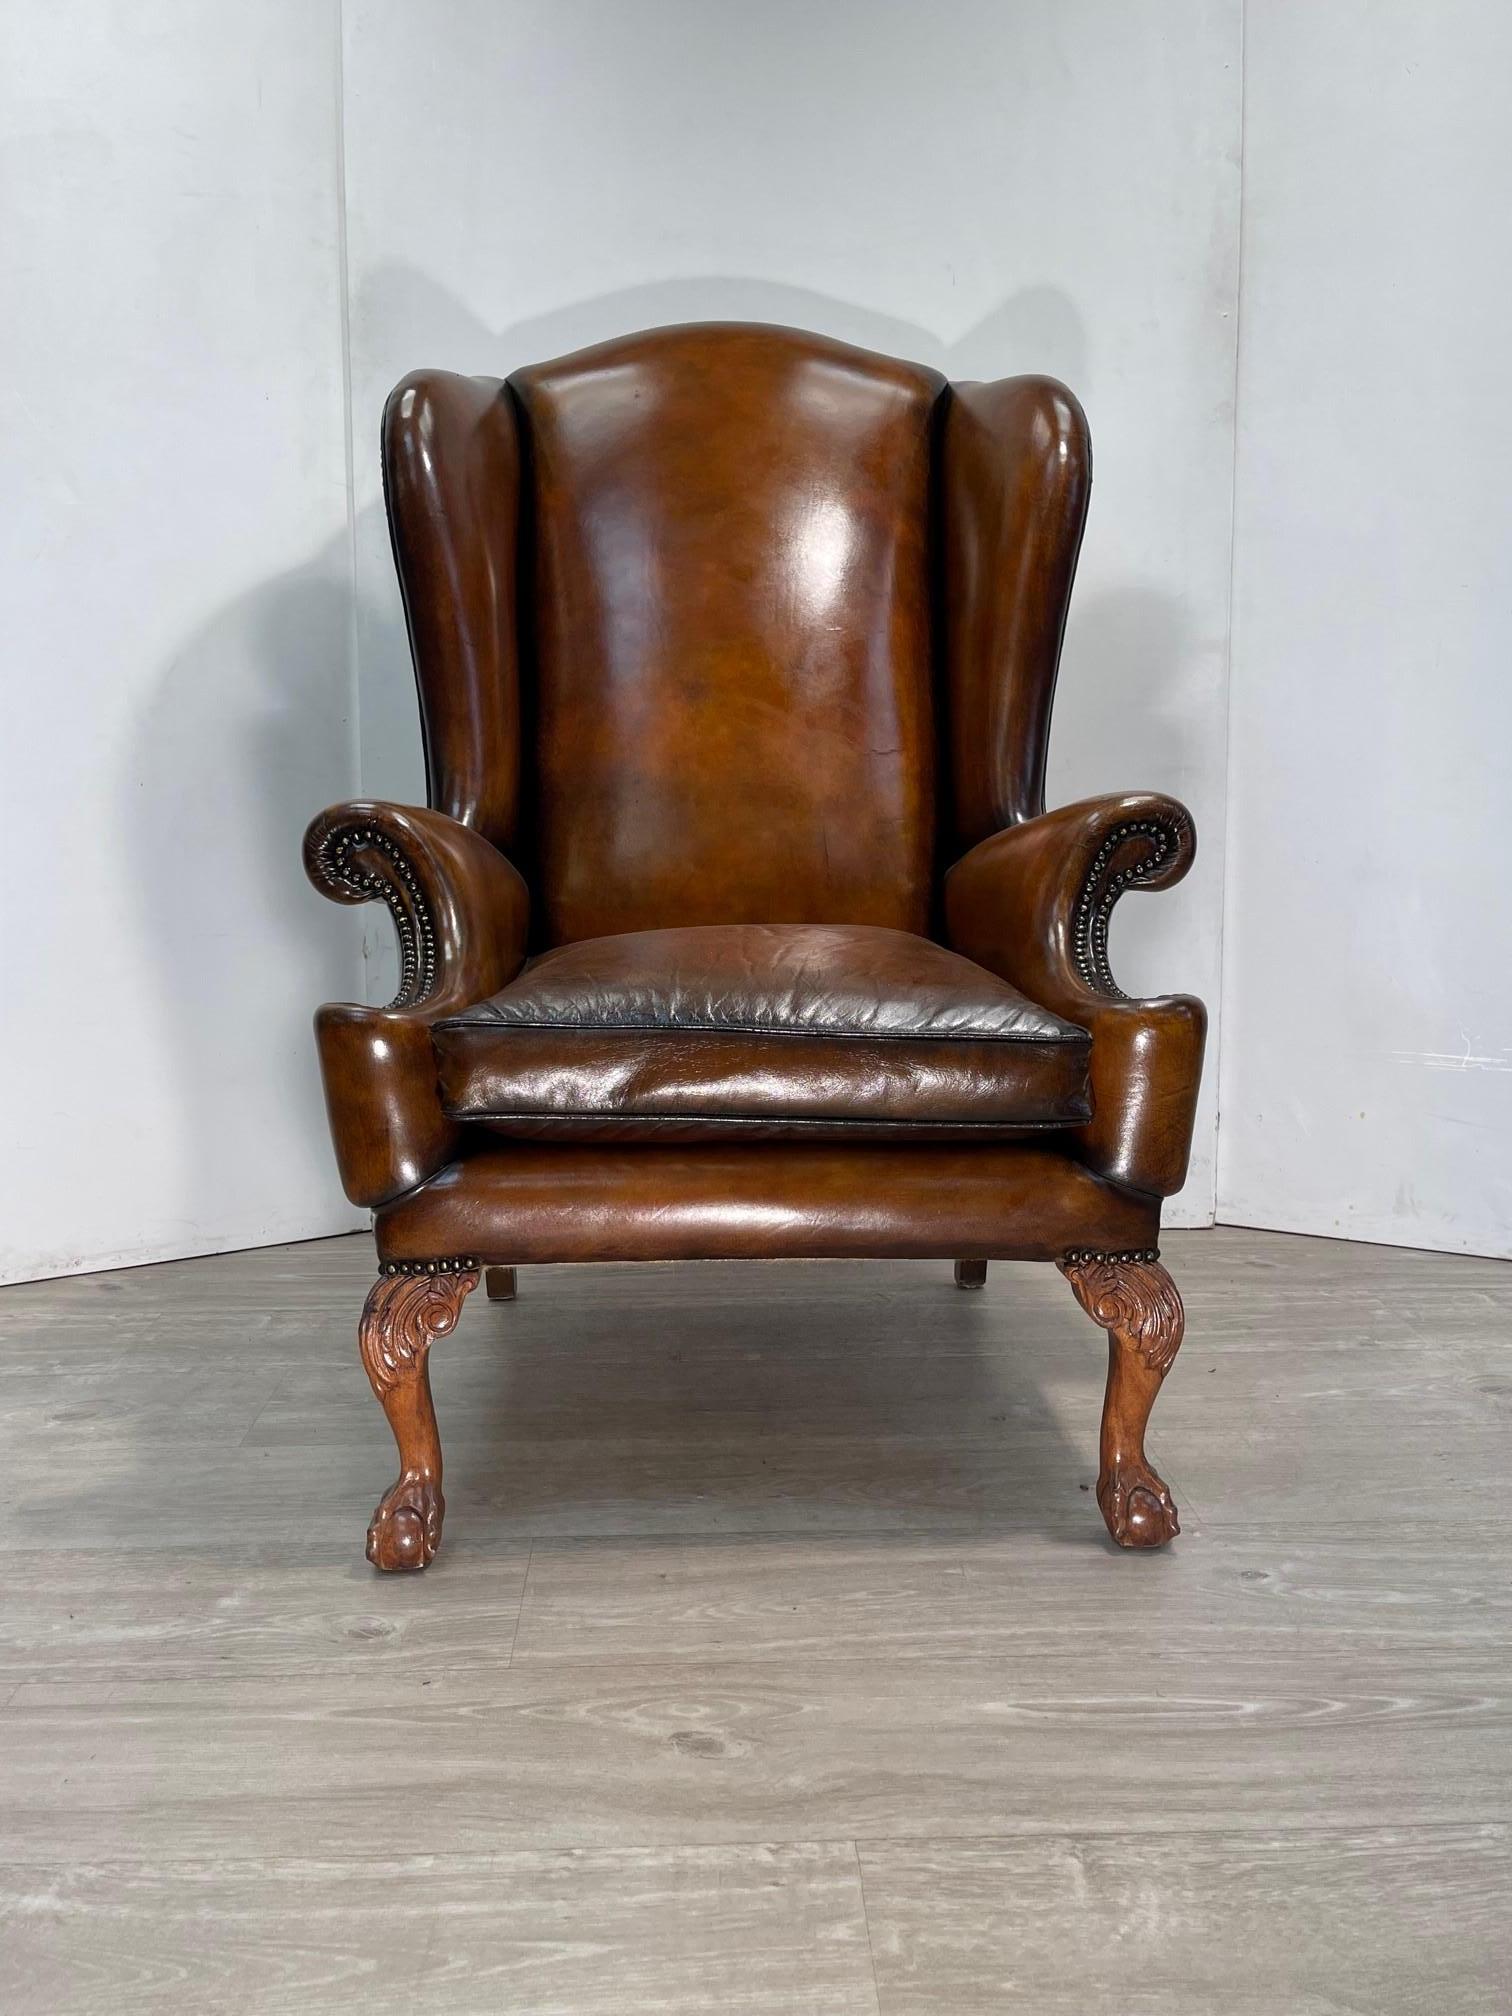 We are delighted to offer for sale this absolutely stunning fully restored hand dyed cigar brown leather, Victorian style oversized wingback armchair with hand carved claw & ball feet.

What a chair! This is pure art furniture from all angles, the